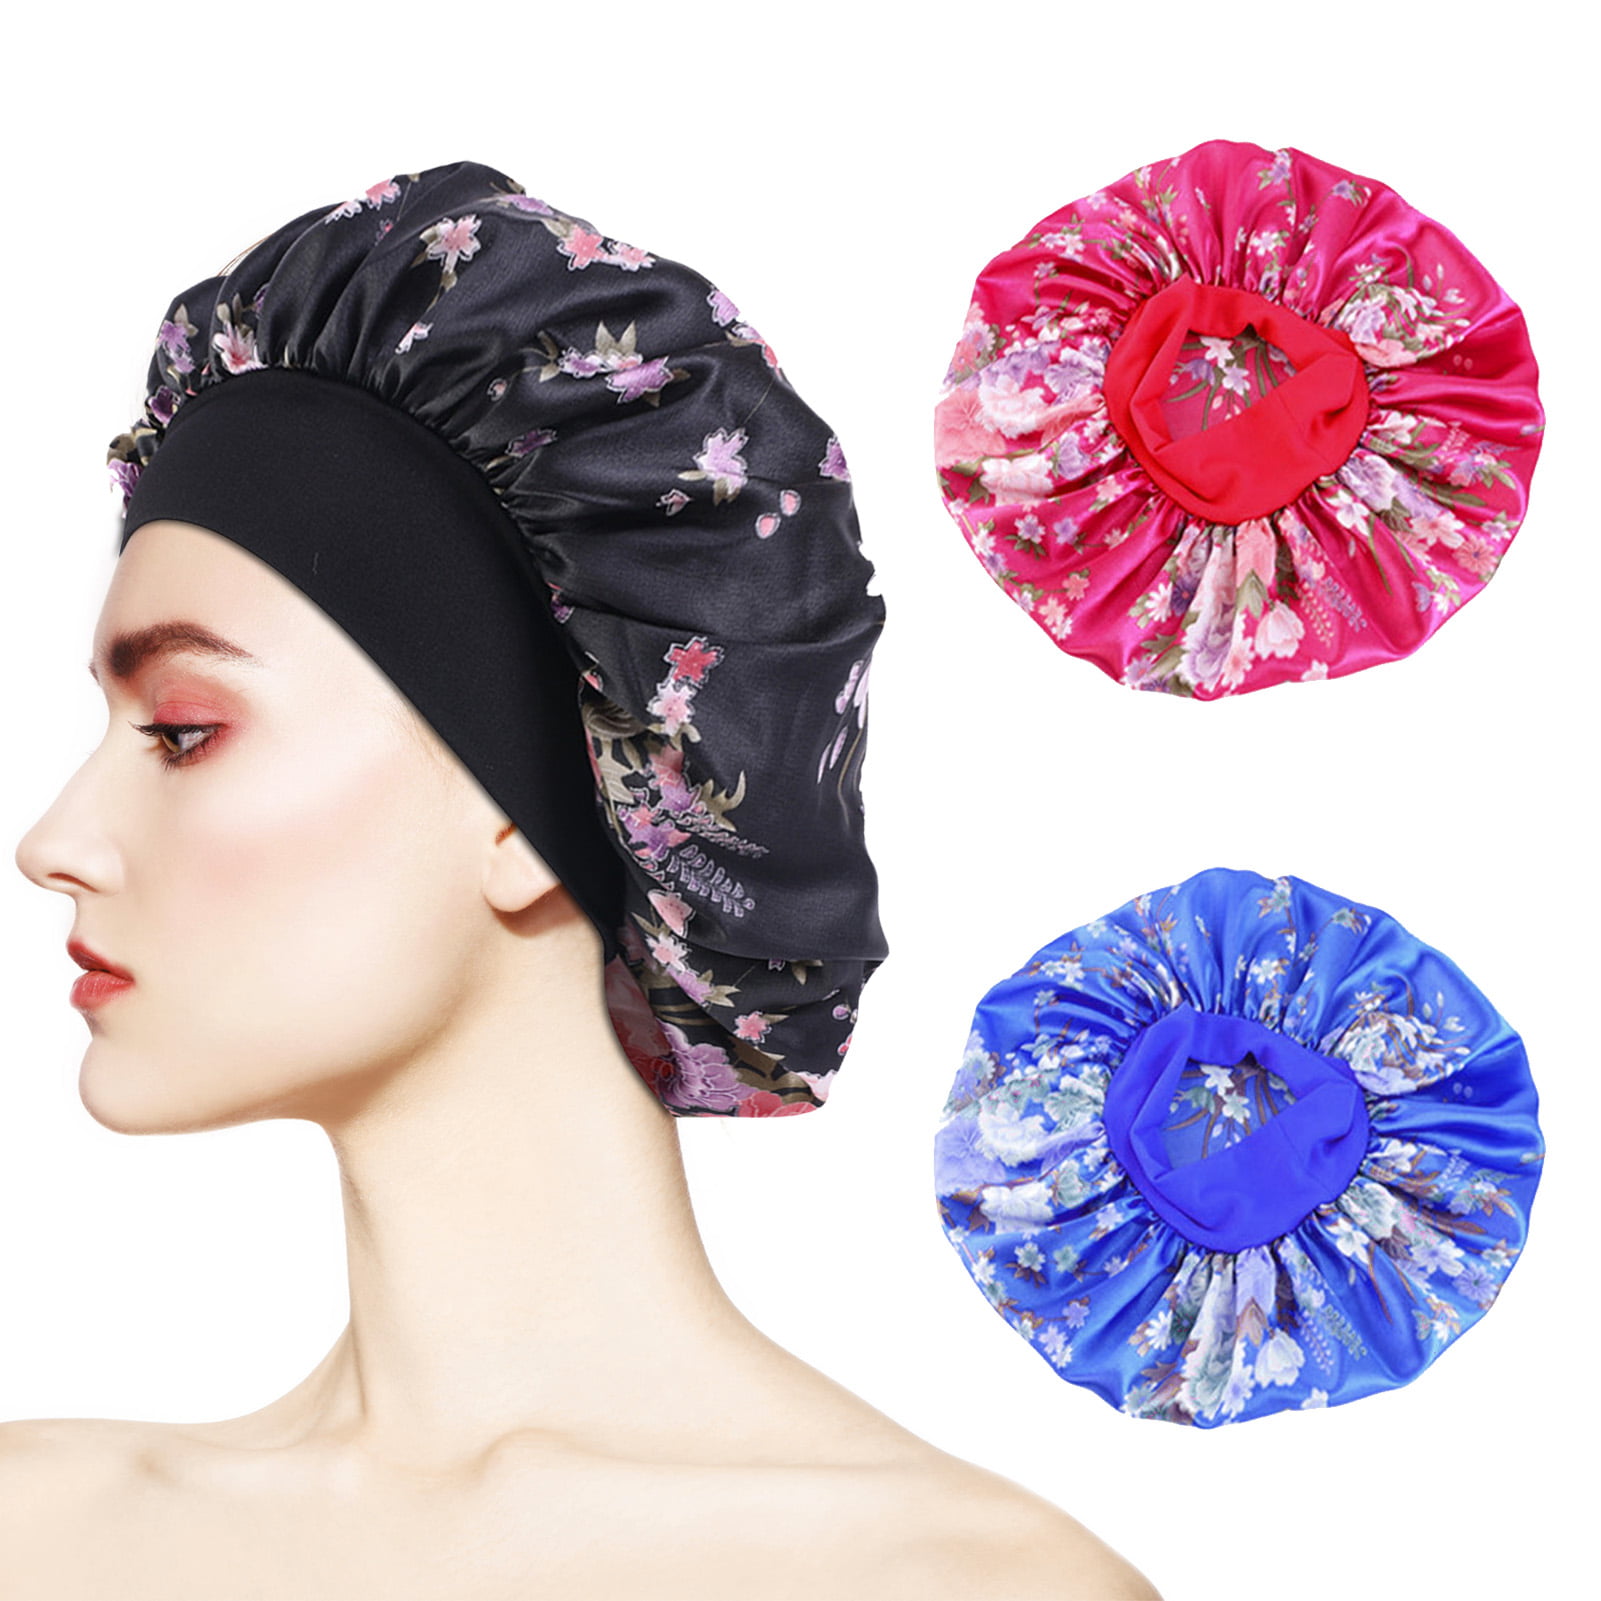 Satin Bonnet With Elastic Band For Curly Hair - Soft And